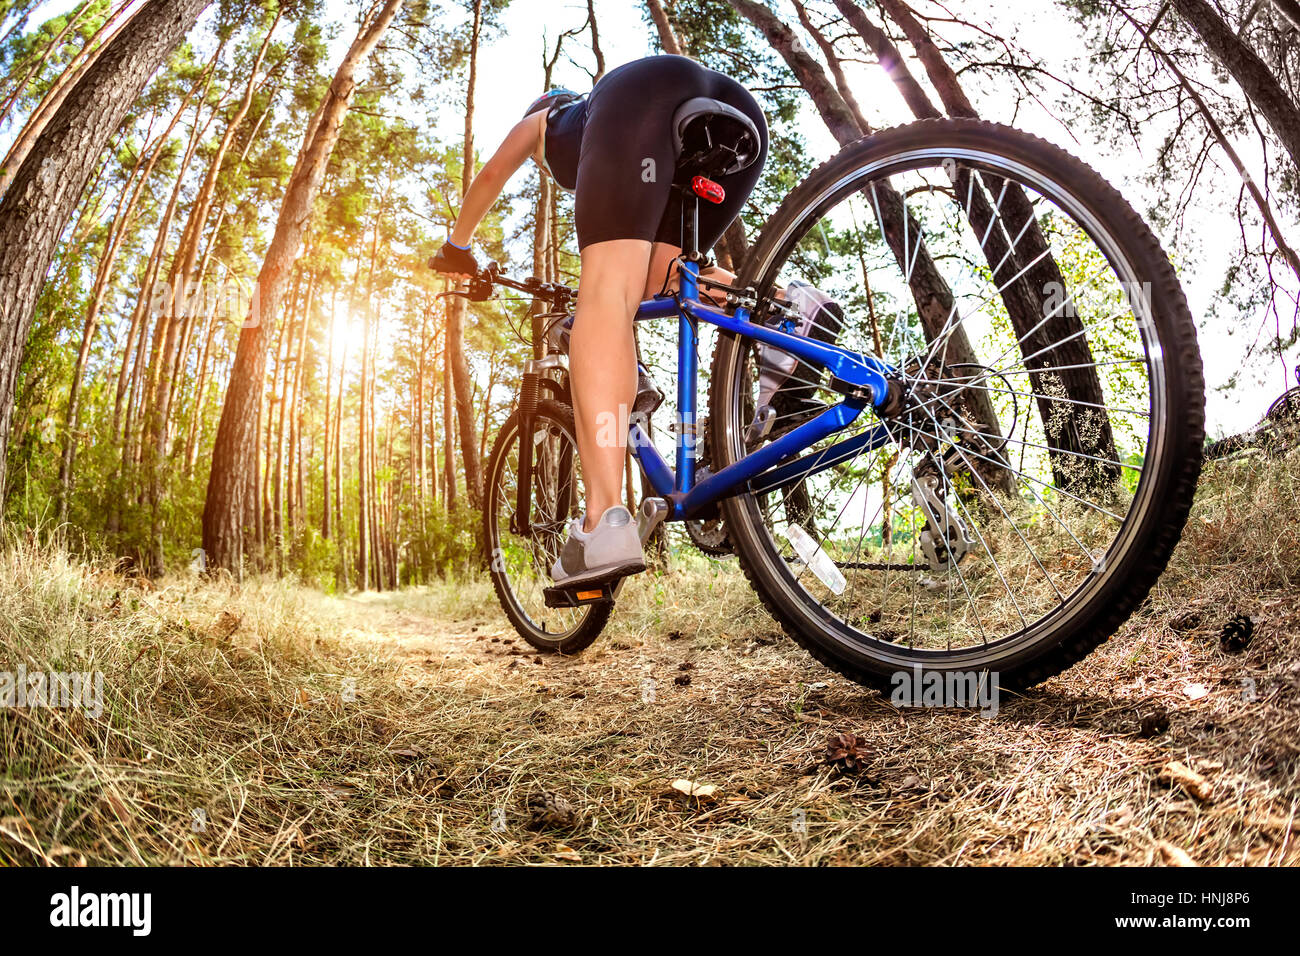 Women on the nature of riding a bike Stock Photo